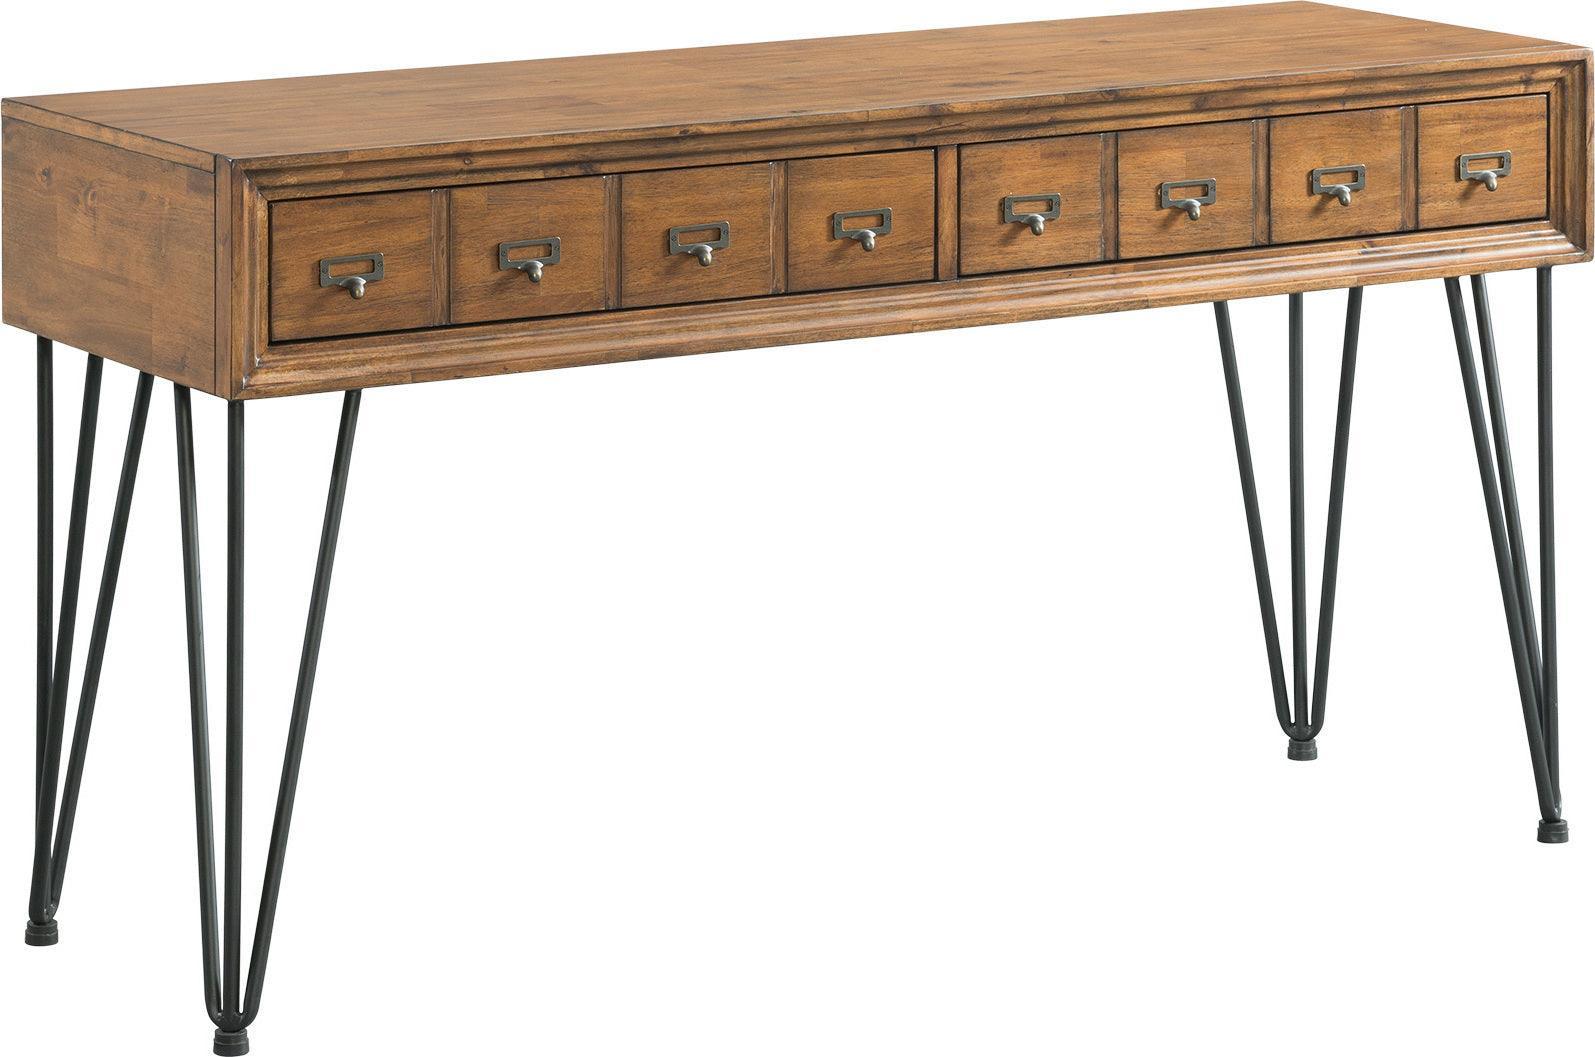 Elements Consoles - Tanner 33" Console Table Light Walnut